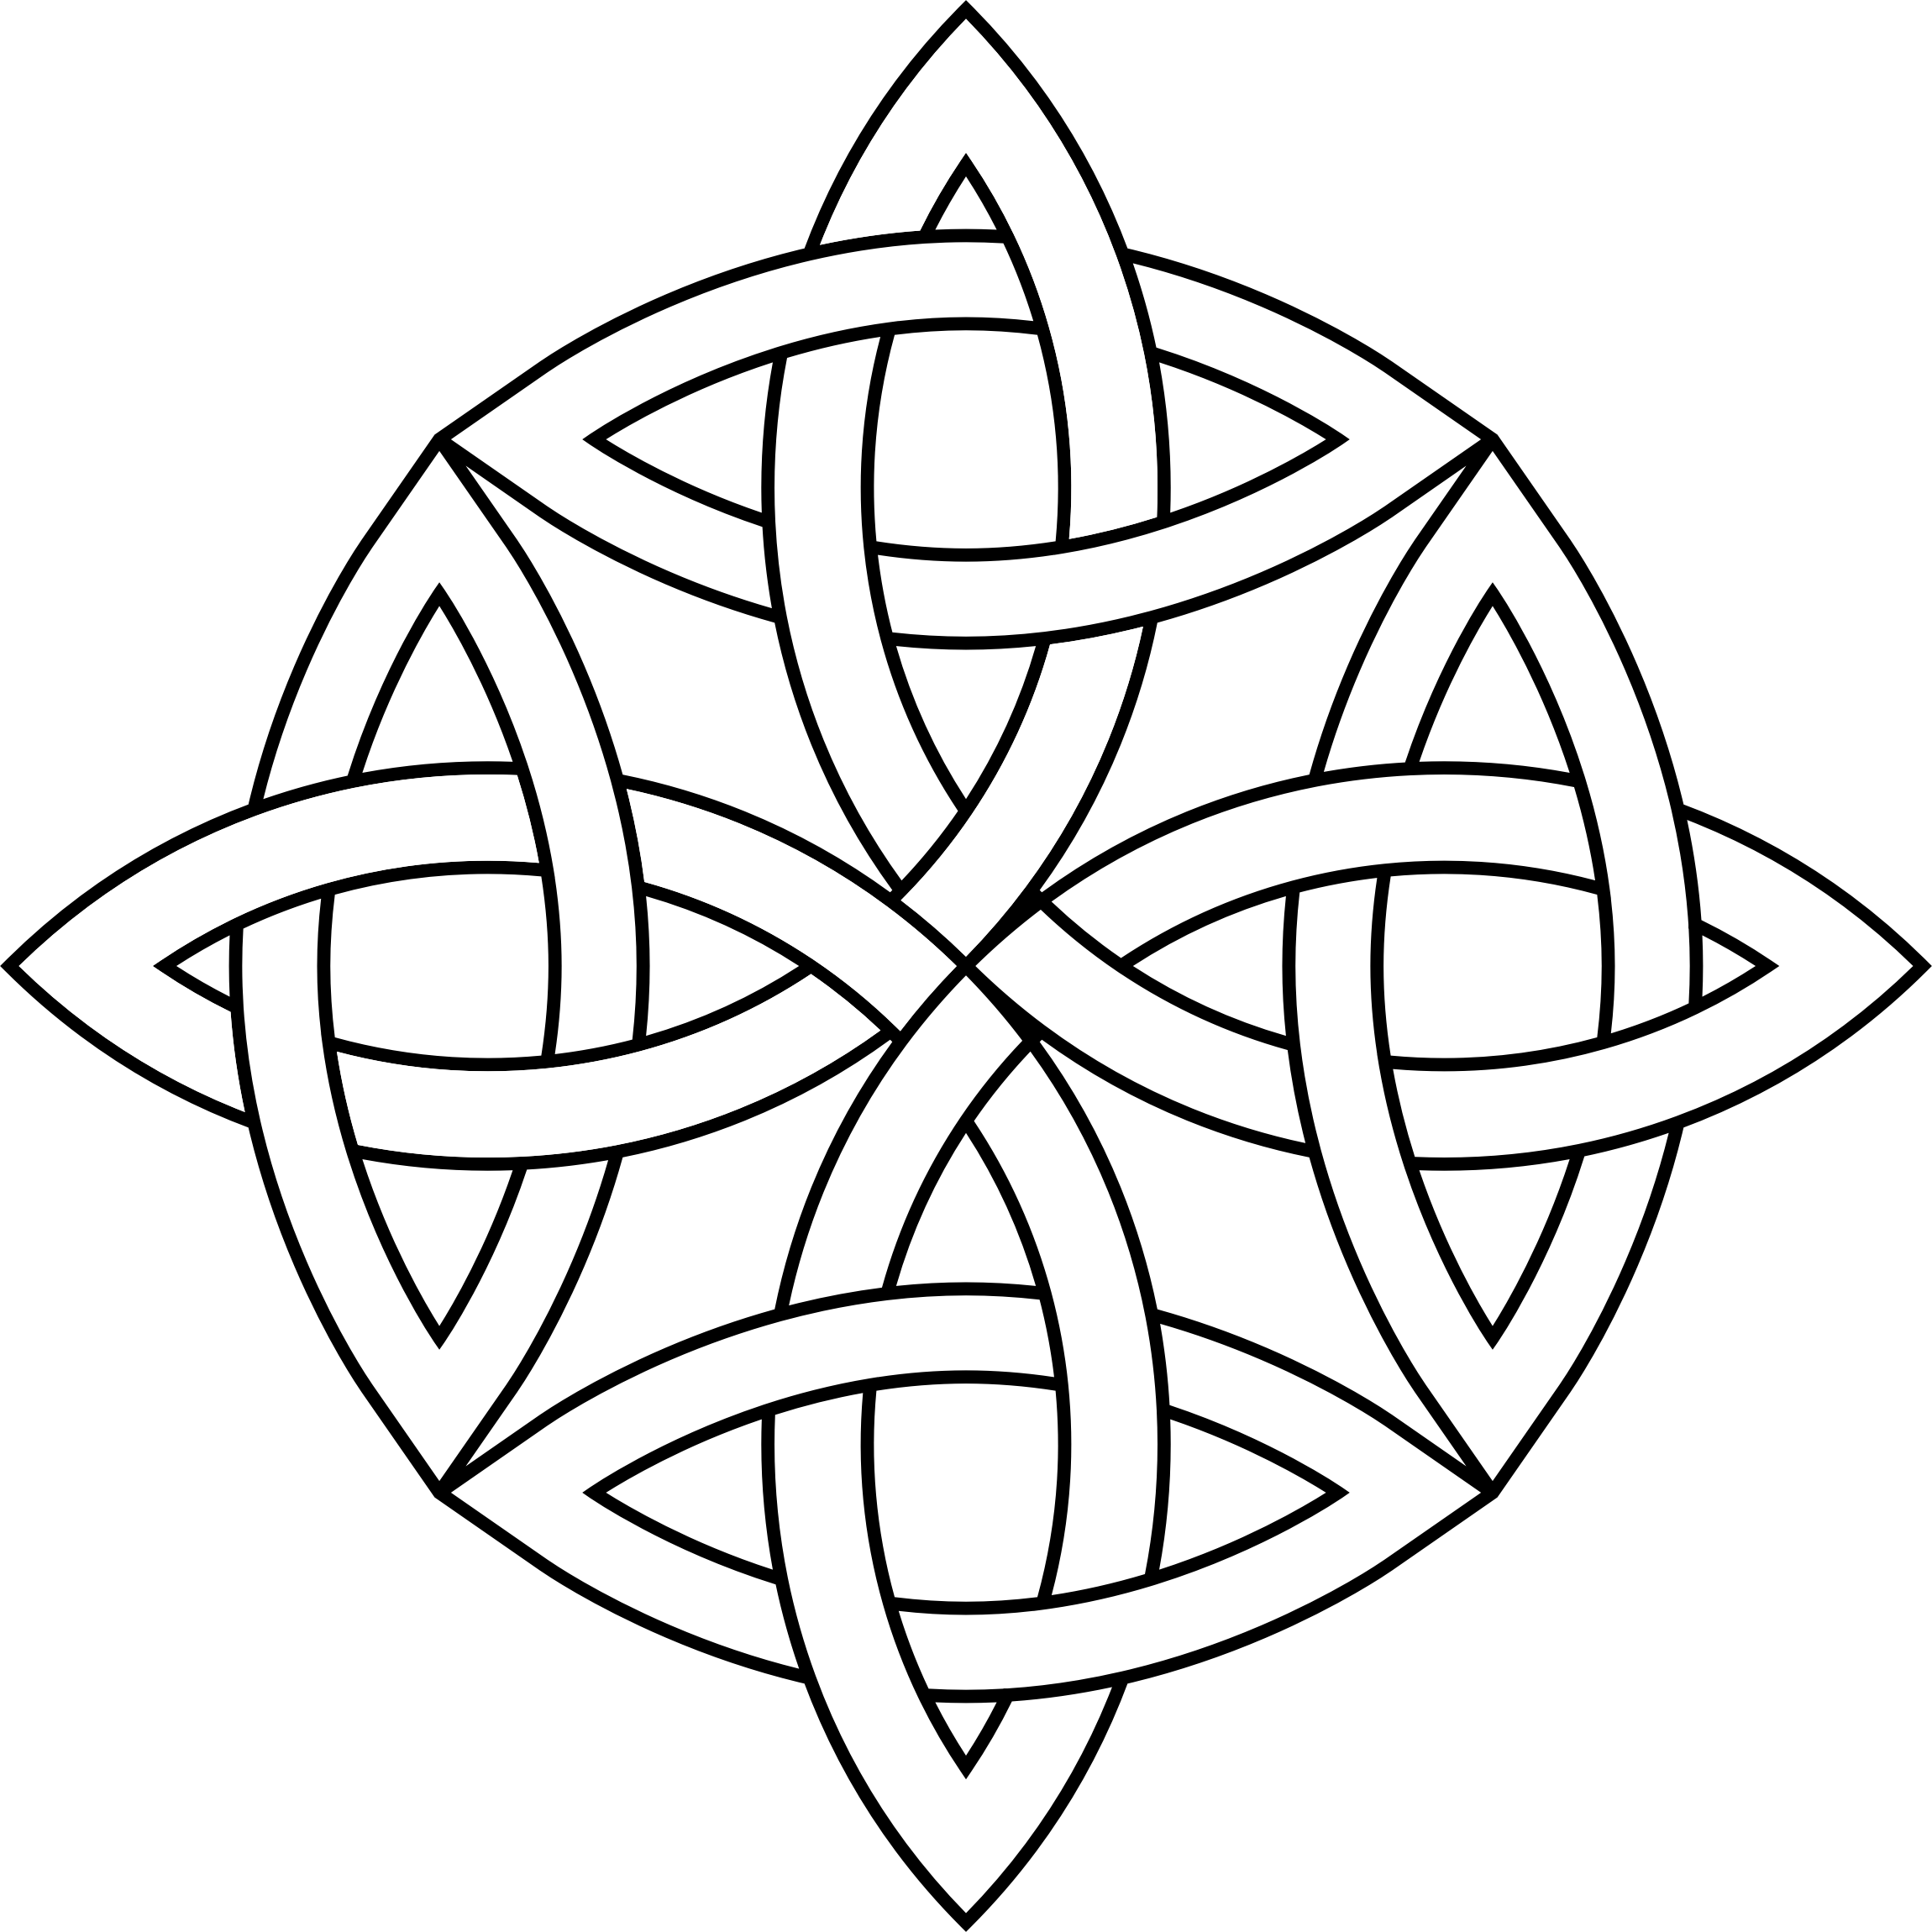 celtic-patterns-and-designs-quilt-inspiration-free-pattern-day-st